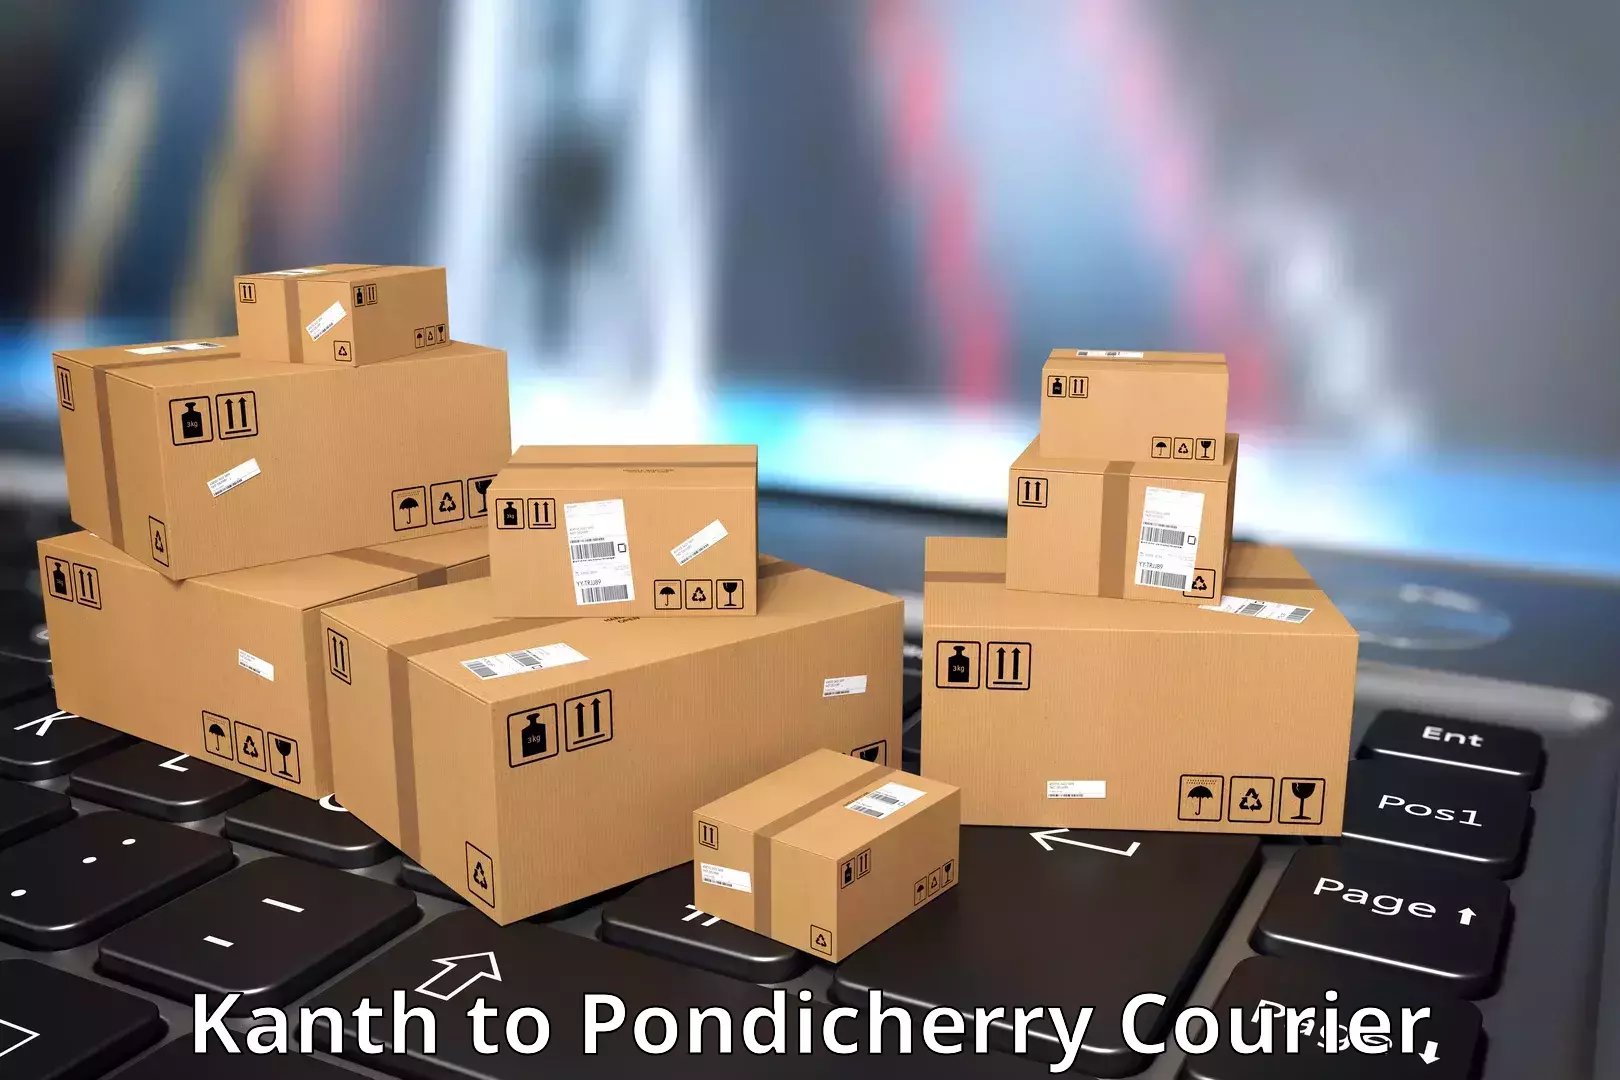 Modern courier technology Kanth to Pondicherry